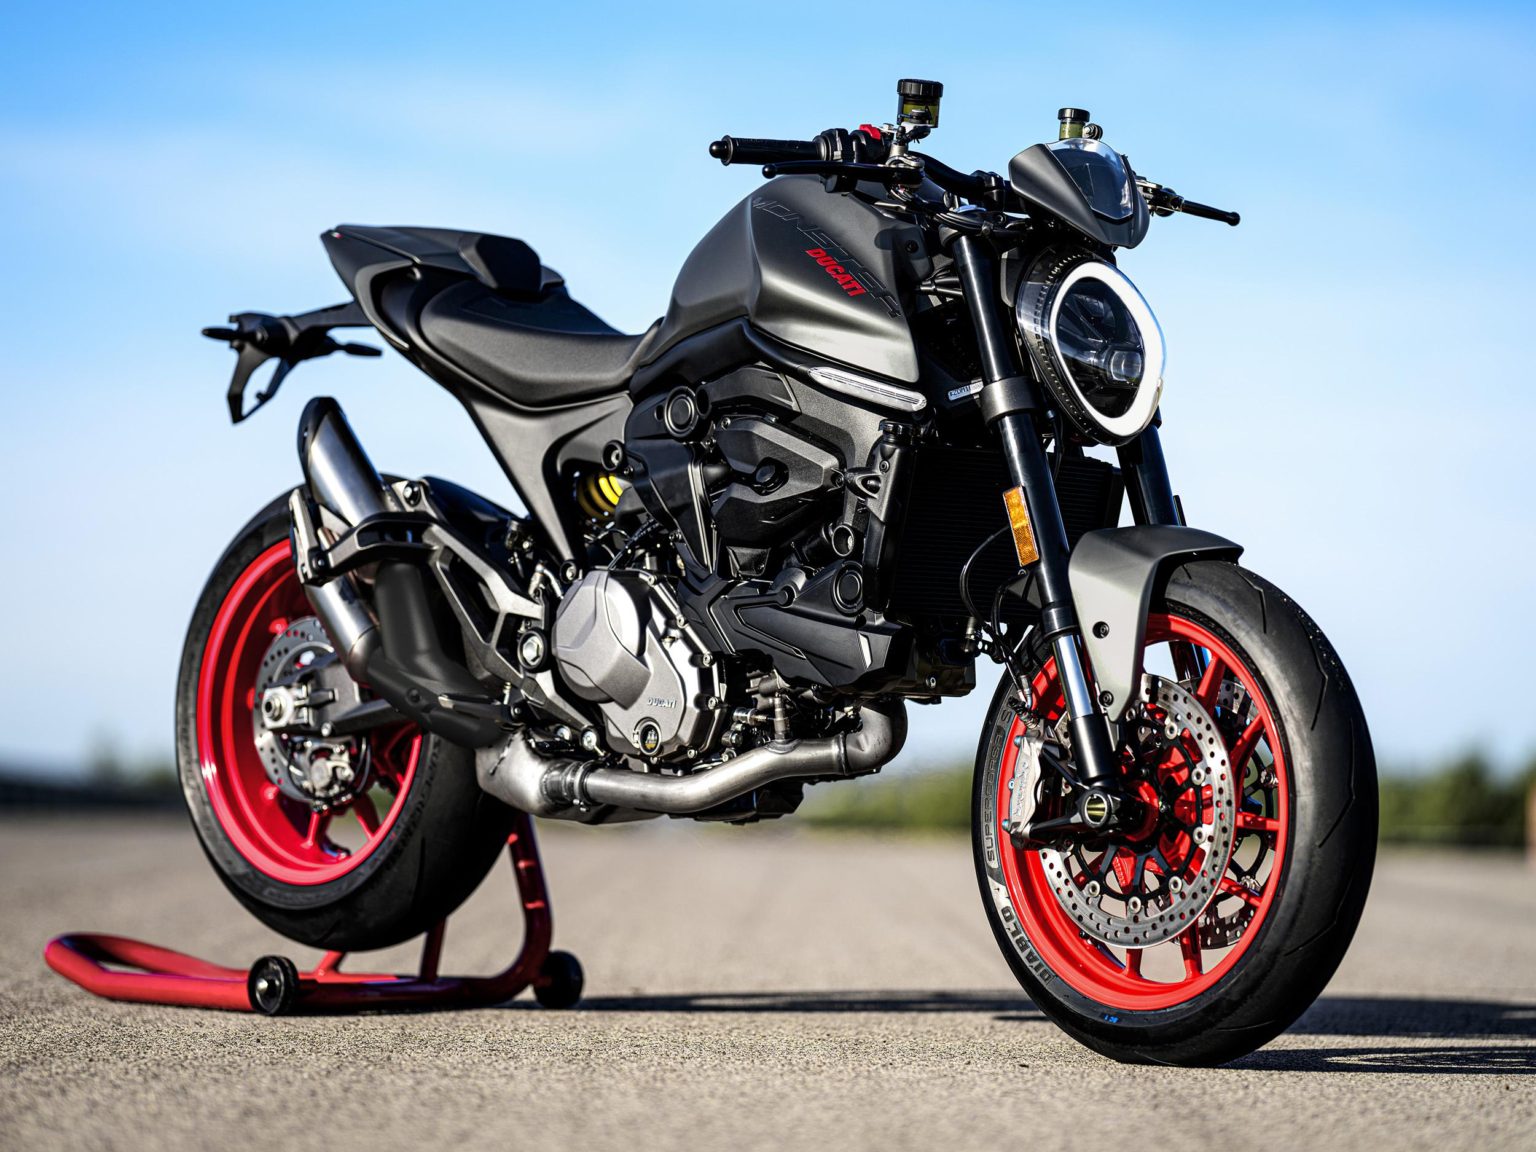 The Ducati Monster has been reborn lighter and more agile for the new model year.